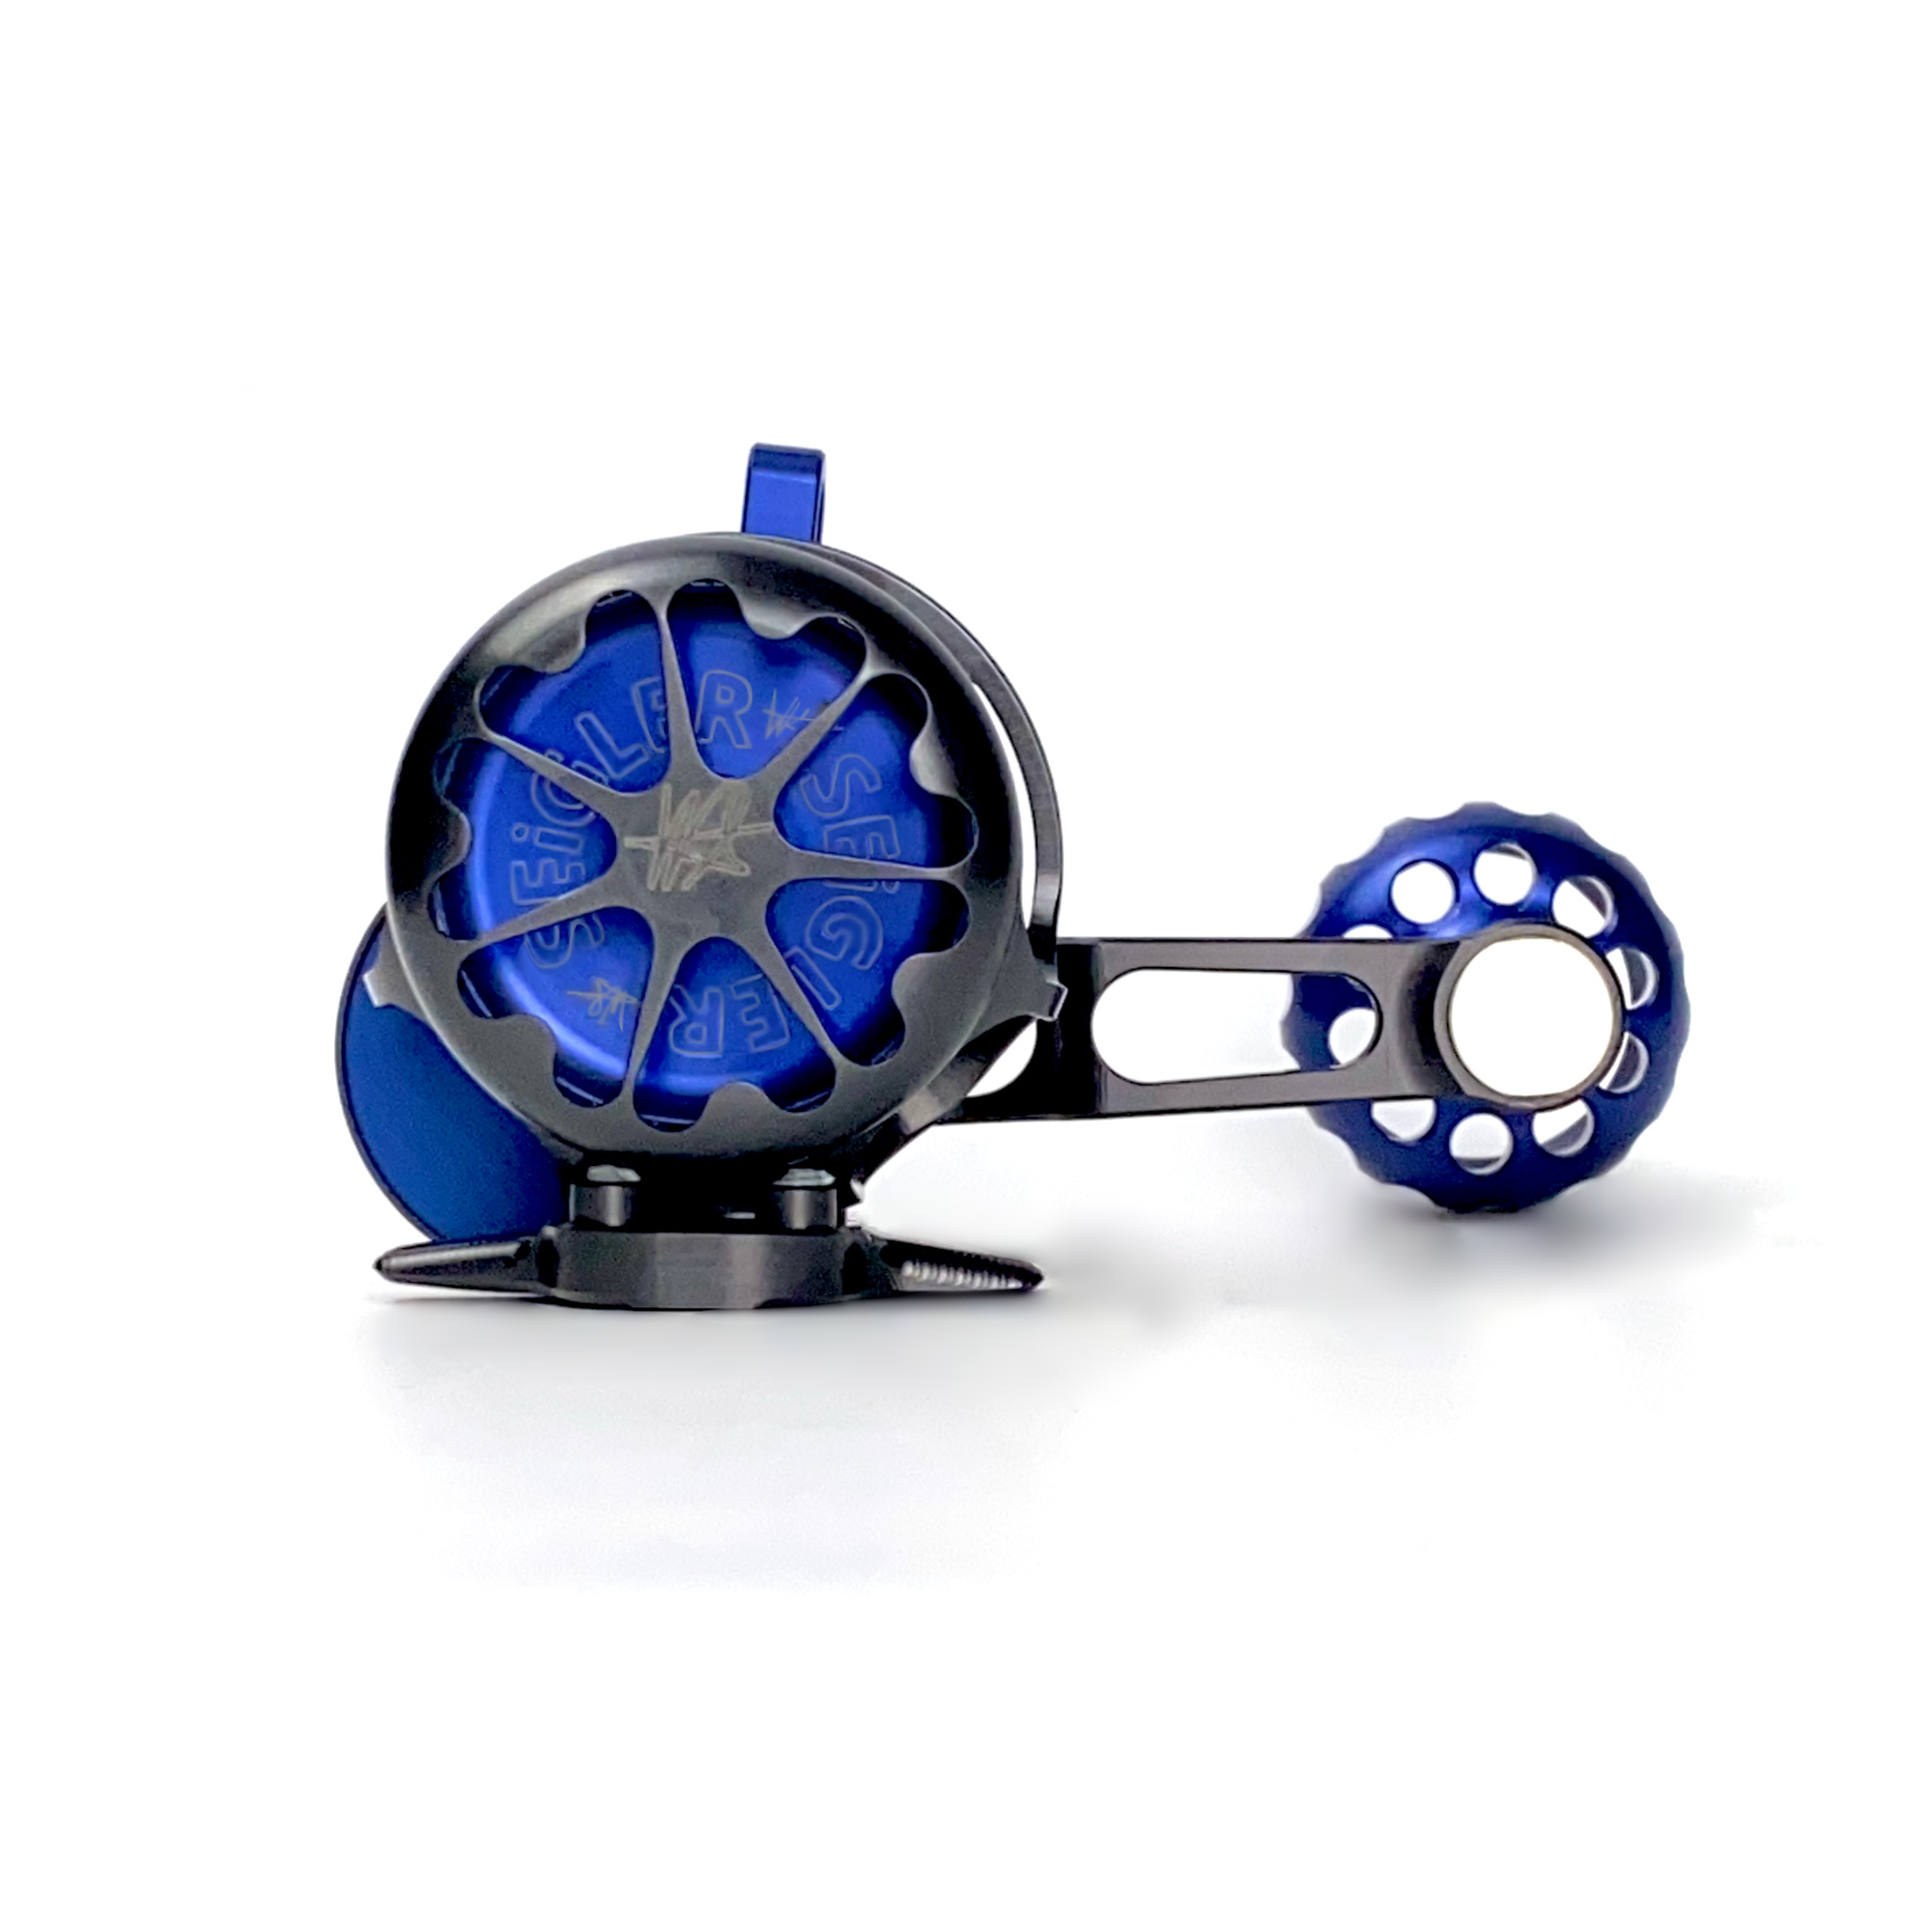 SGN Signature Edition fishing reel, meticulously hand-built with machined main and side cases, slow pitch longer crank arm for increased leverage, and a low profile reel foot for ultralight trigger-style rods. Limited monthly production by Wes. Ideal for inshore fishing. Proudly made in the USA, hand-assembled and tuned.